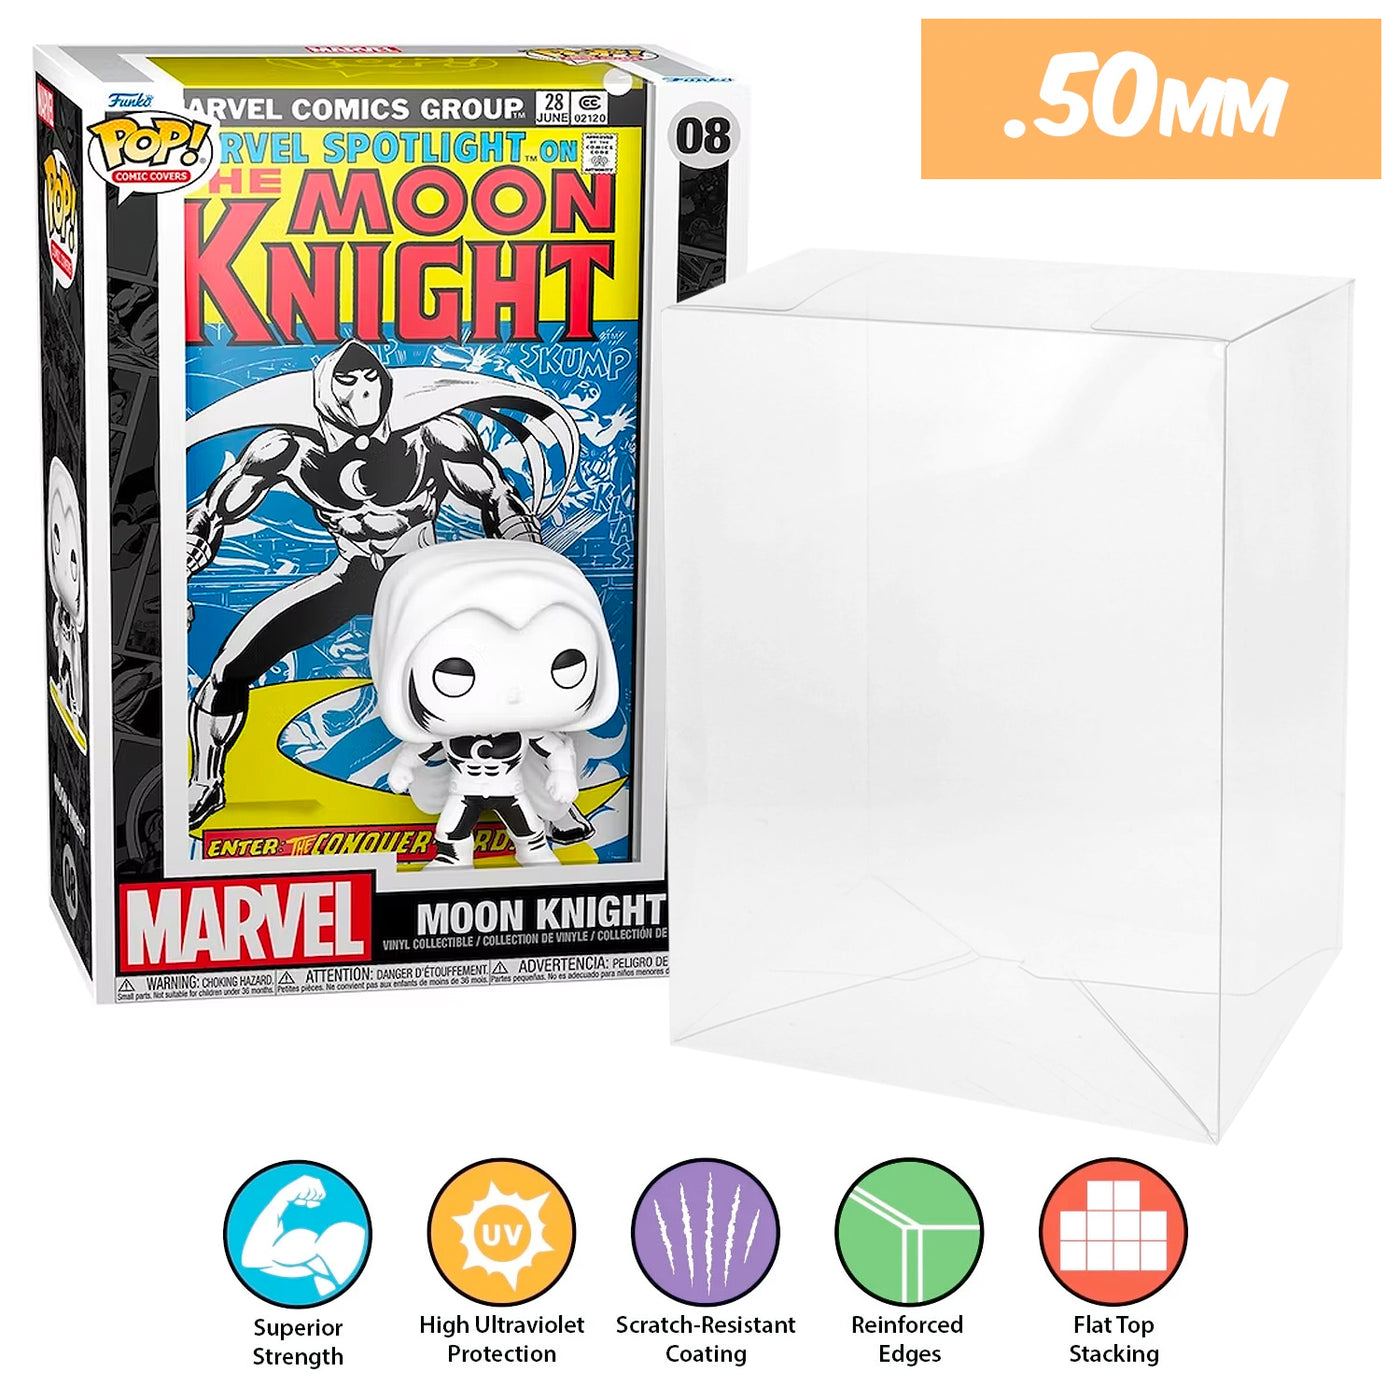 marvel moon knight pop comic covers best funko pop protectors thick strong uv scratch flat top stack vinyl display geek plastic shield vaulted eco armor fits collect protect display case kollector protector